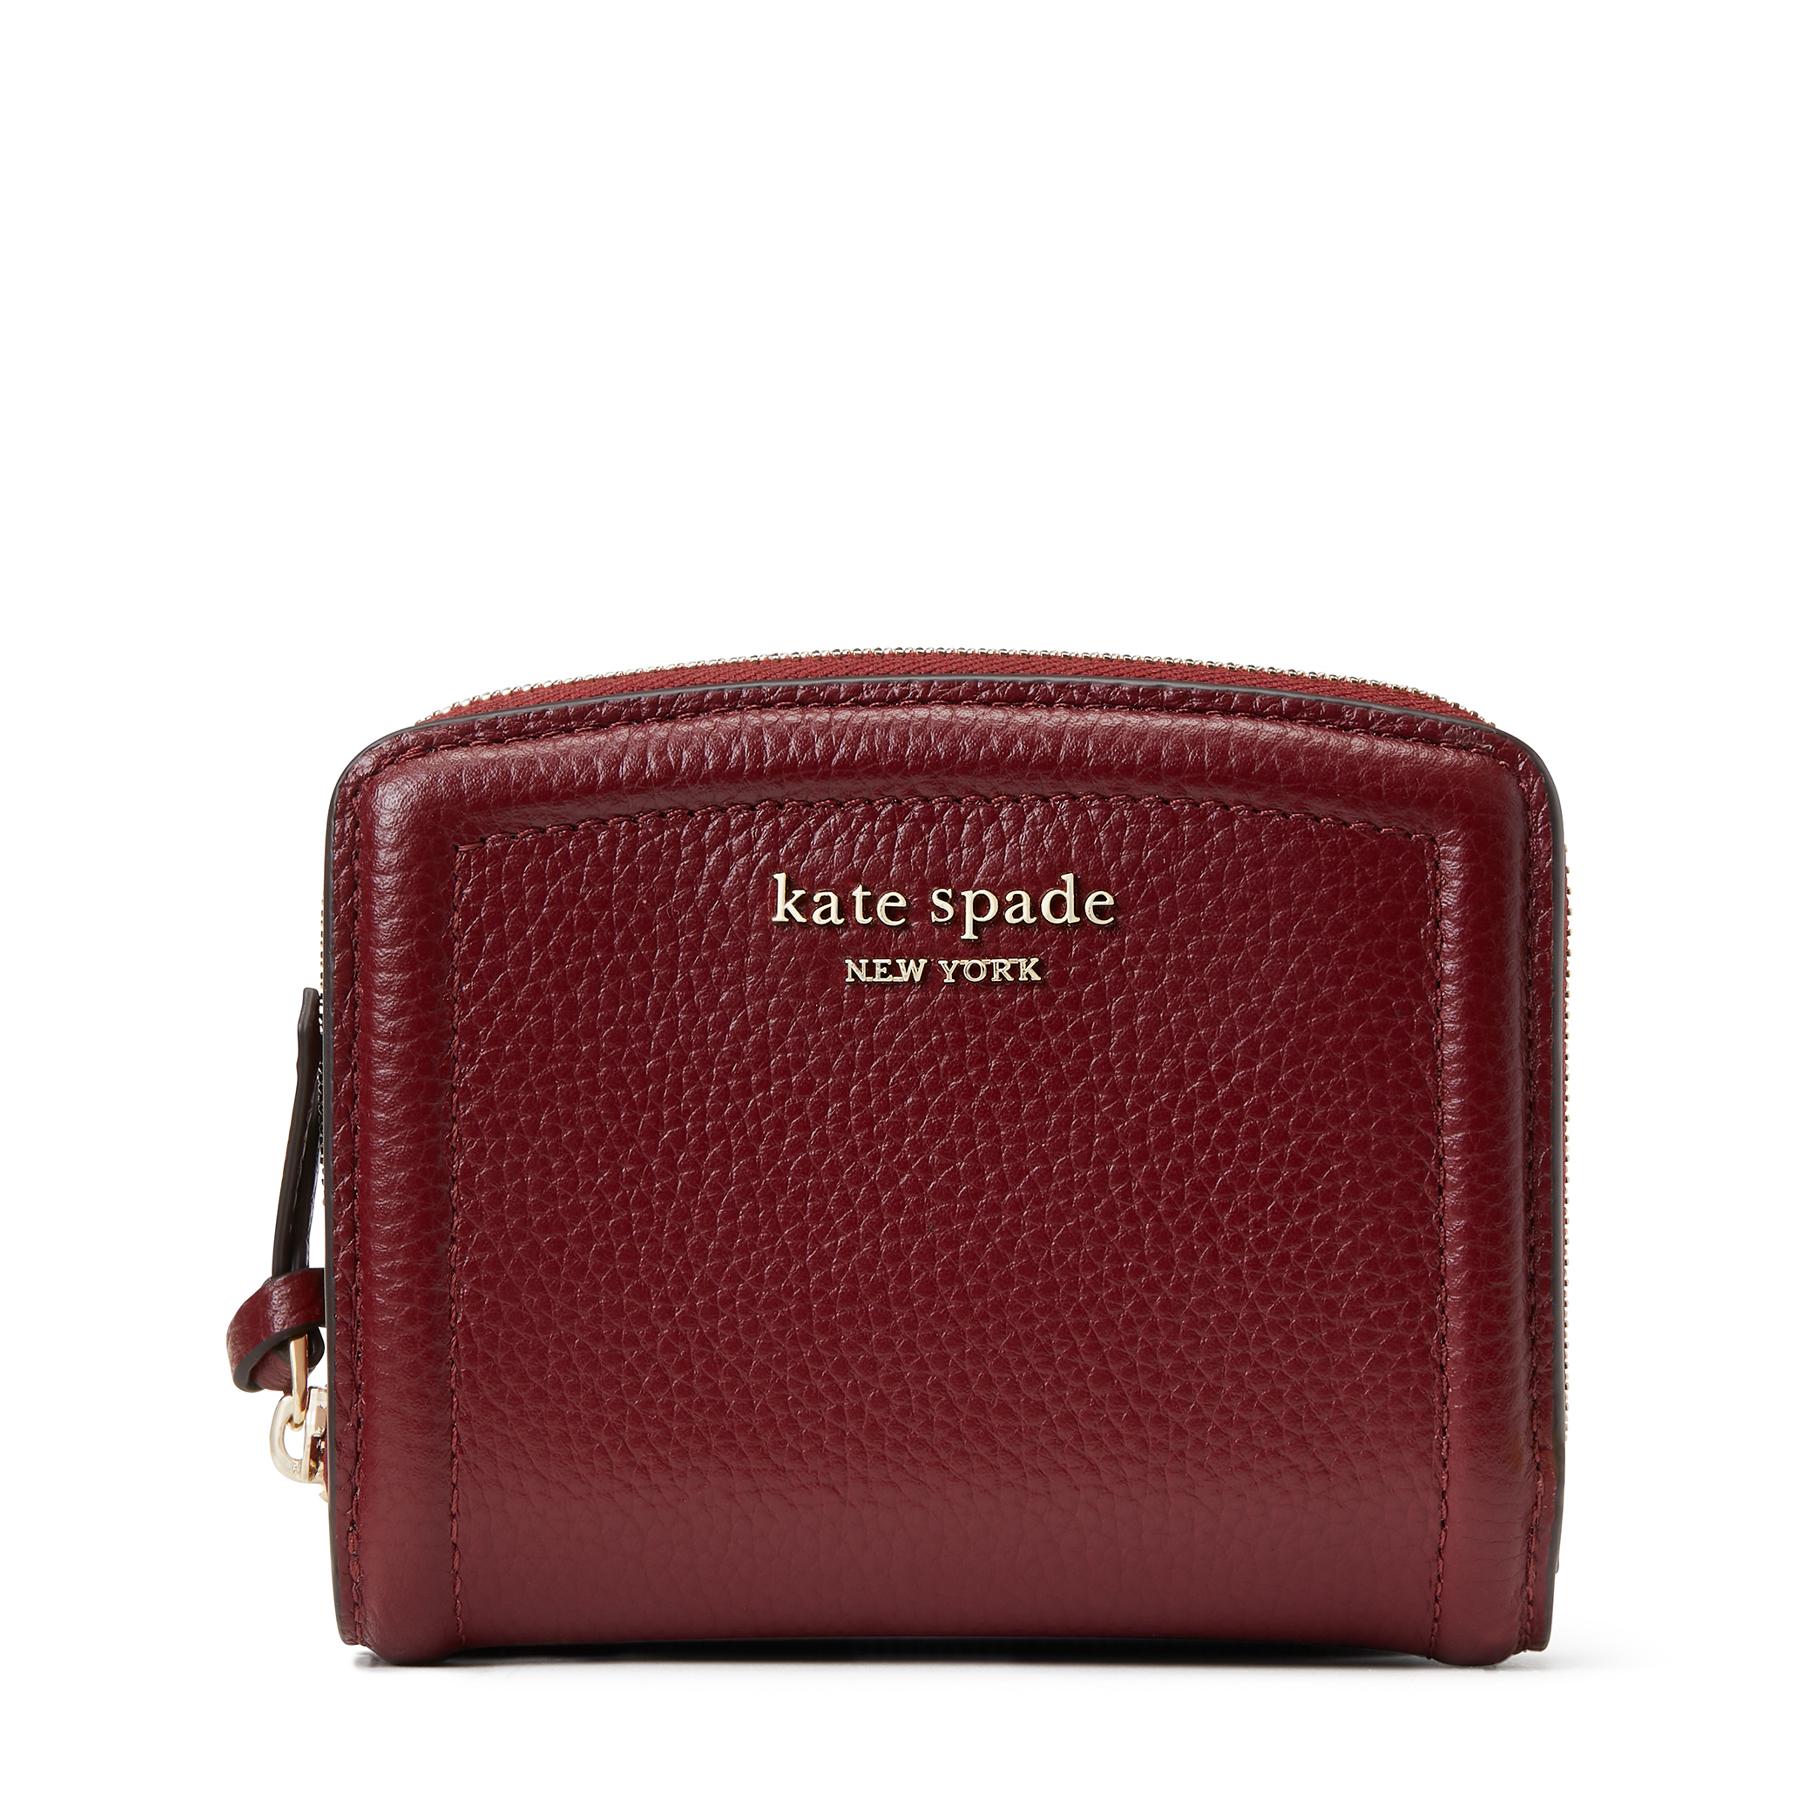 Kate Spade Knott Pebbled Leather Small Compact Wallet in Red | Lyst